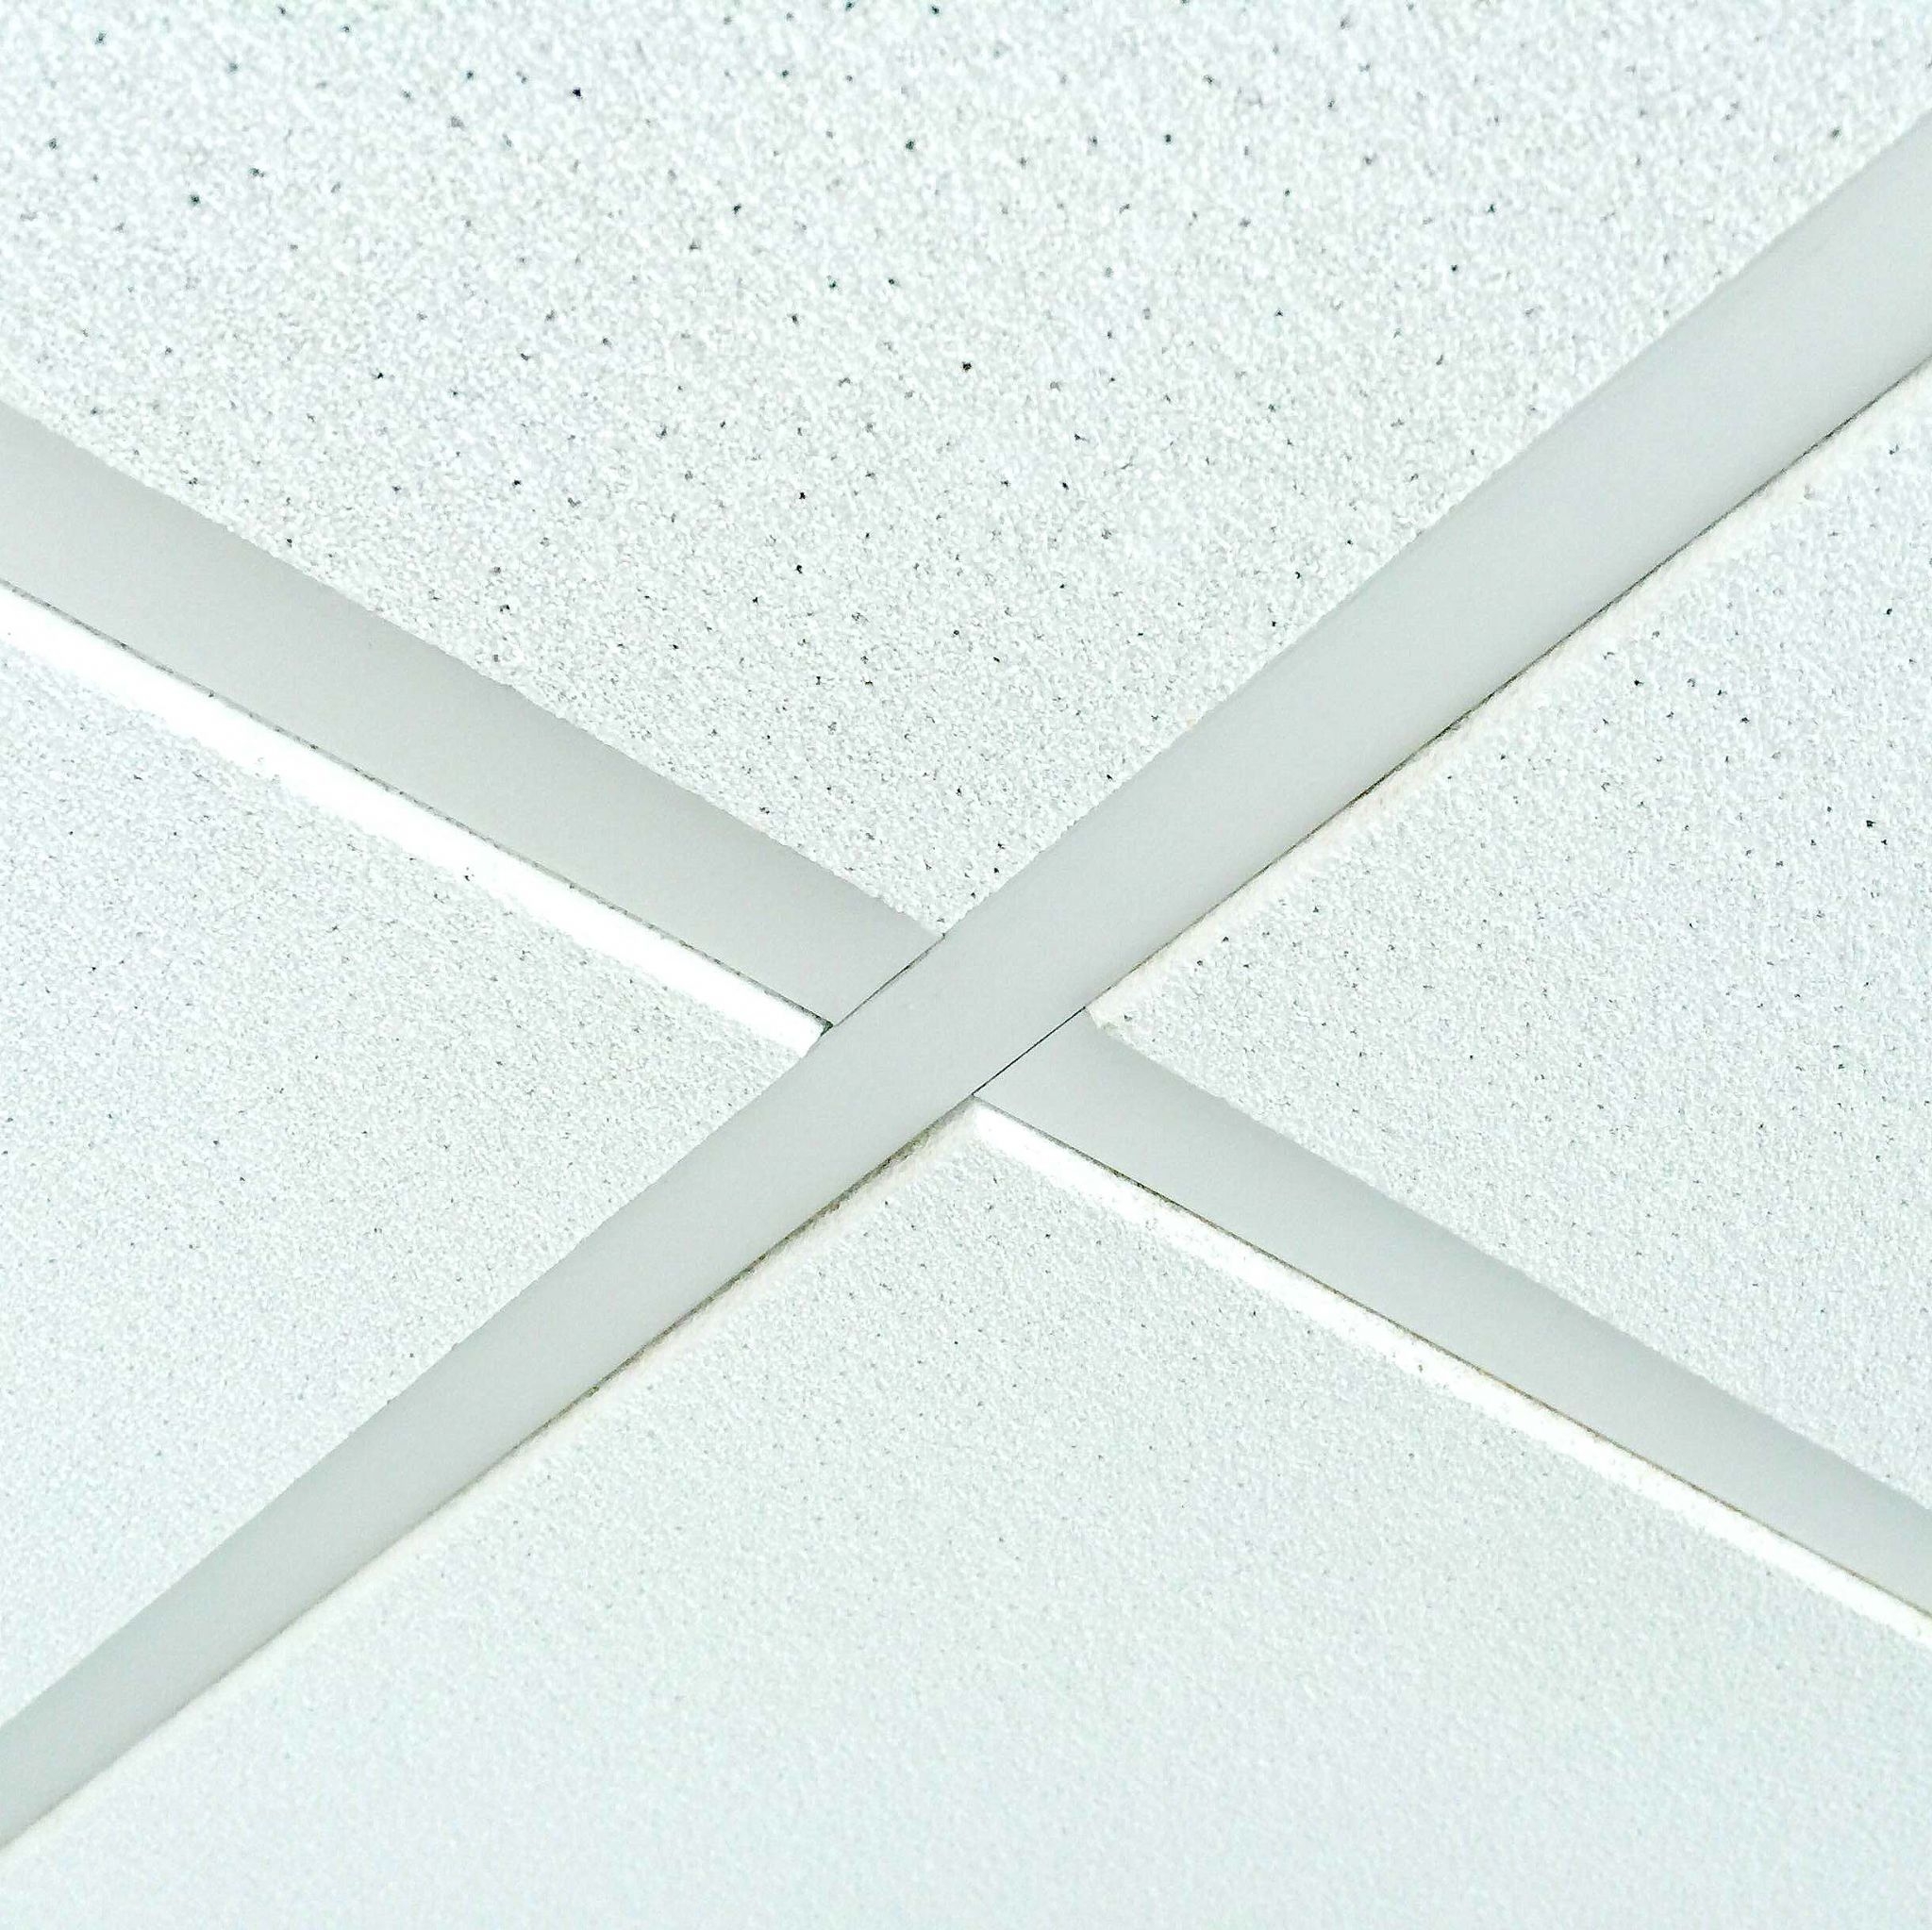 Armstrong Tegular Edge Ceiling Tiles Armstrong Tegular Edge Ceiling Tiles fine fissured tegular ceiling tiles board 600 x 600mm square edge 24mm 2048 X 2046